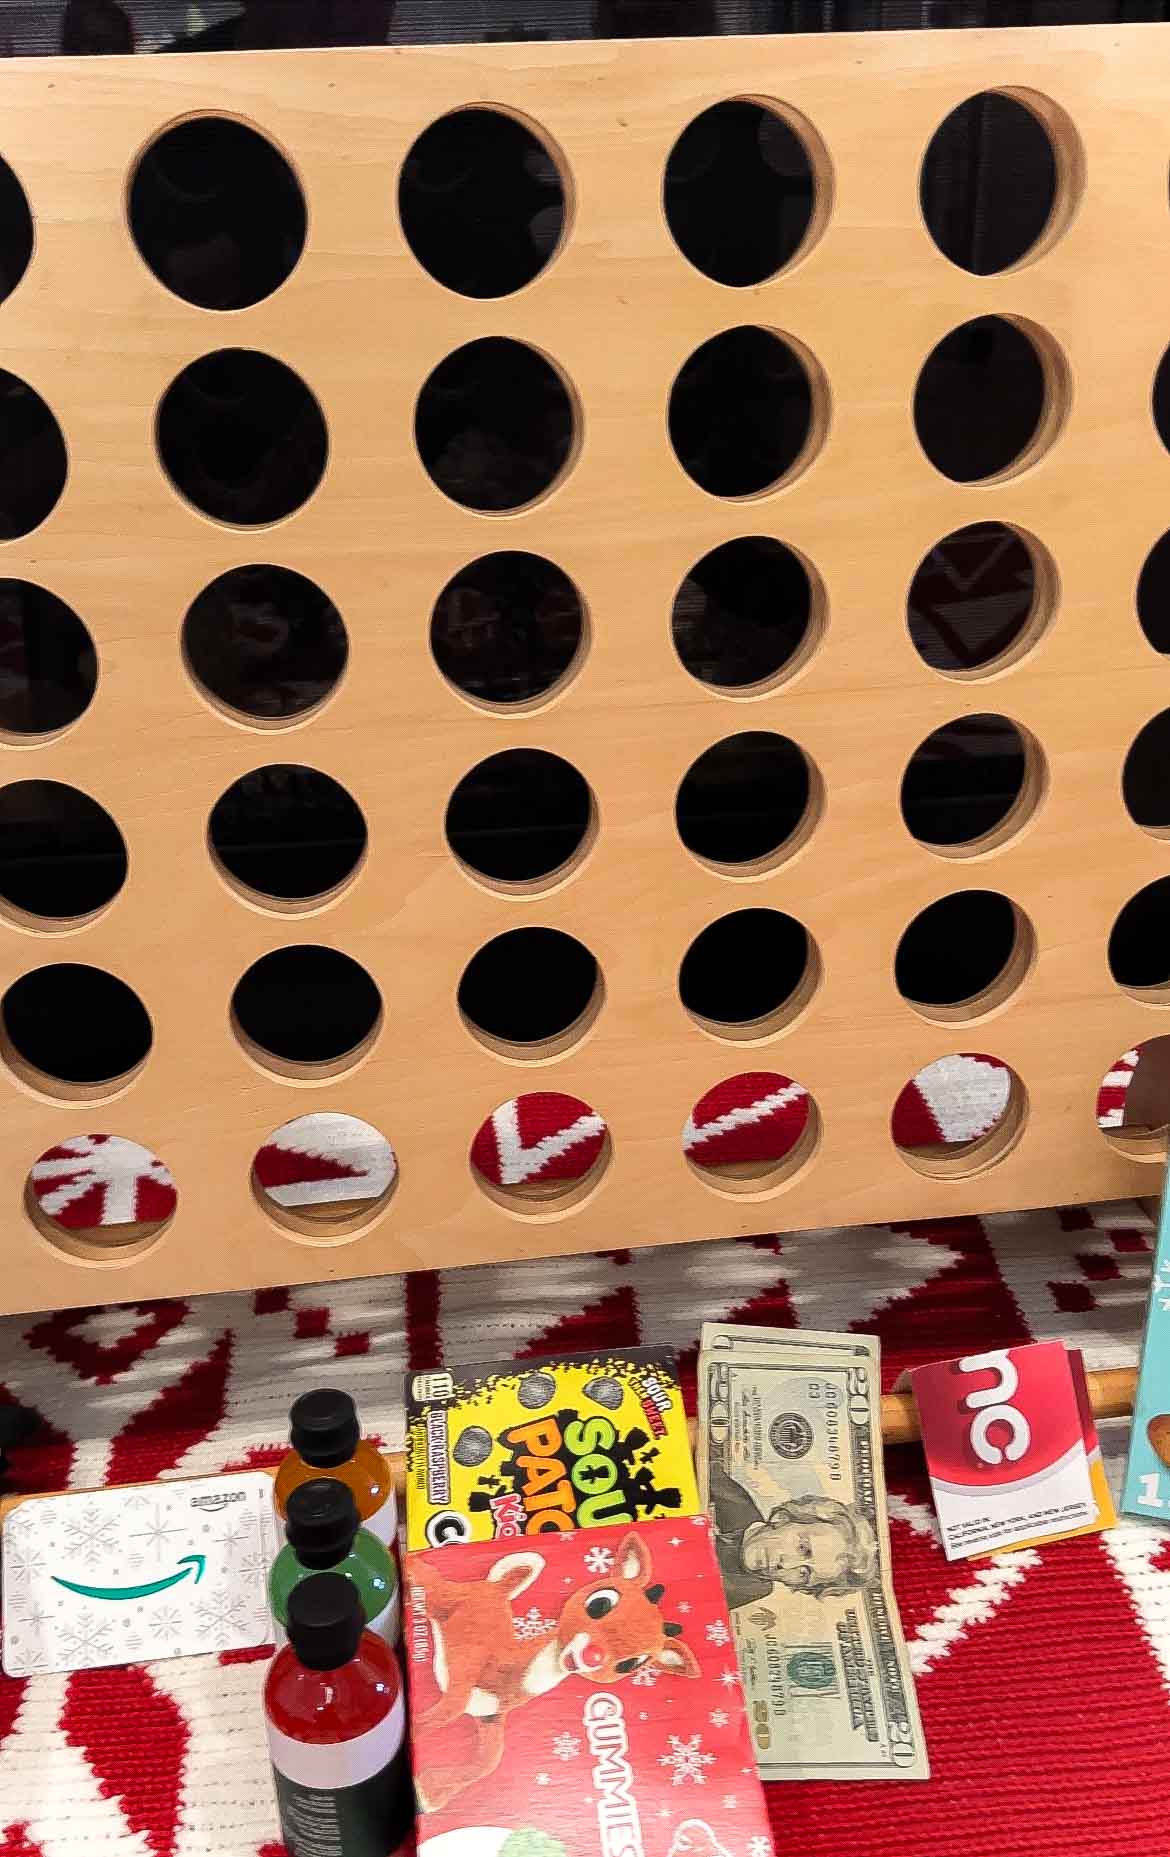 prizes underneath a connect four game